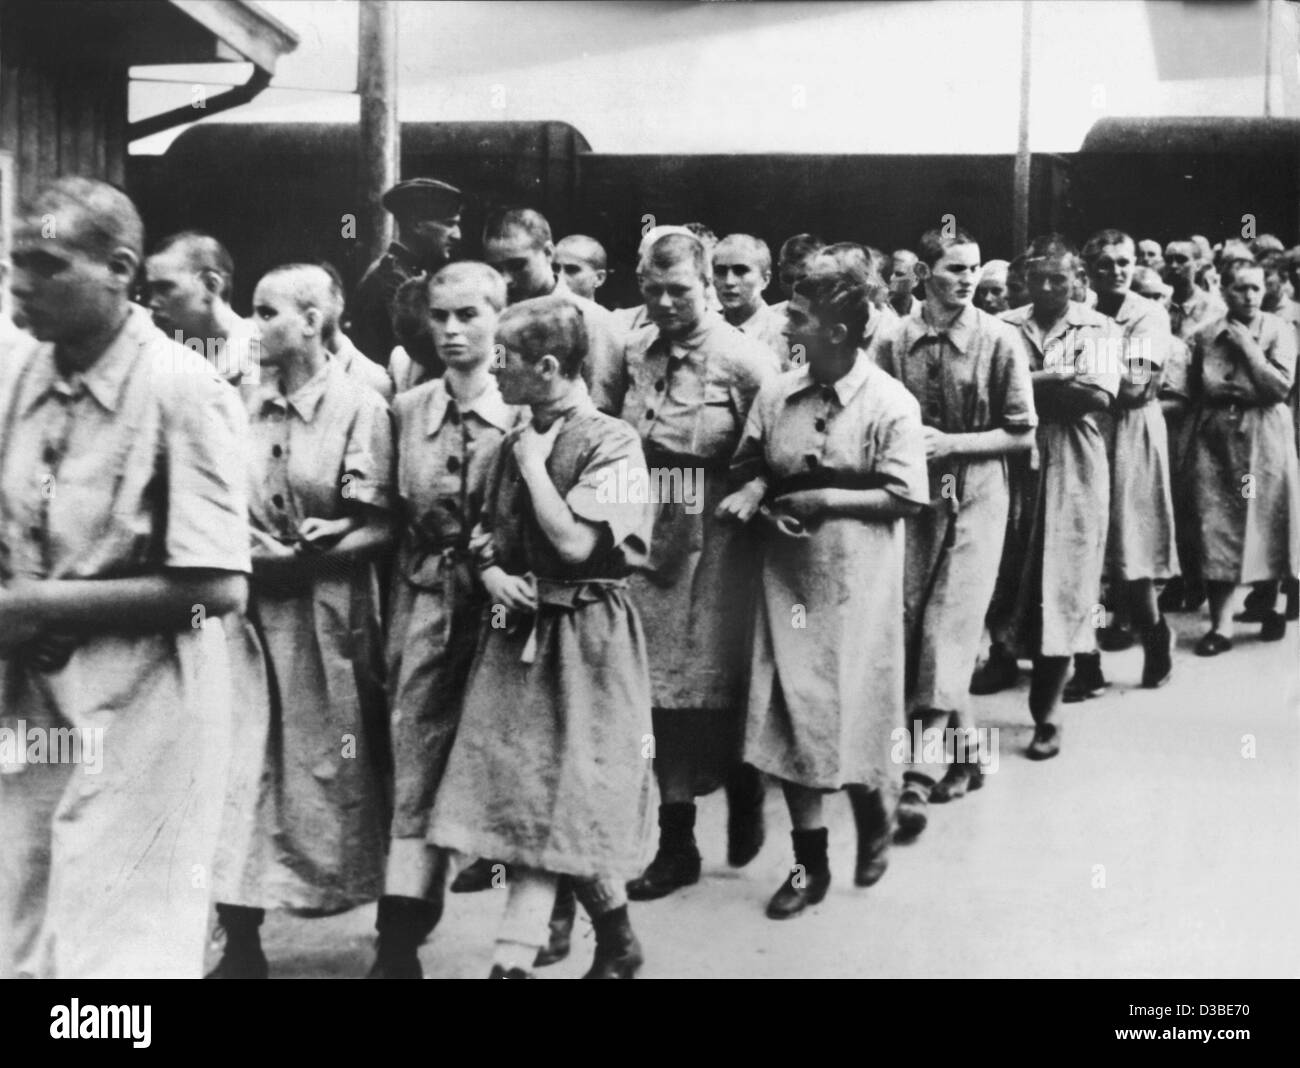 (dpa files) - Female prisoners are led away for slave work in the German Reich, at the Auschwitz concentration camp, near Krakow, Poland (undated filer). The Nazi SS had the concentration camp established in 1940 and enlarged to an extermination camp in 1941. It is believed that 2.5 to 4 million peo Stock Photo